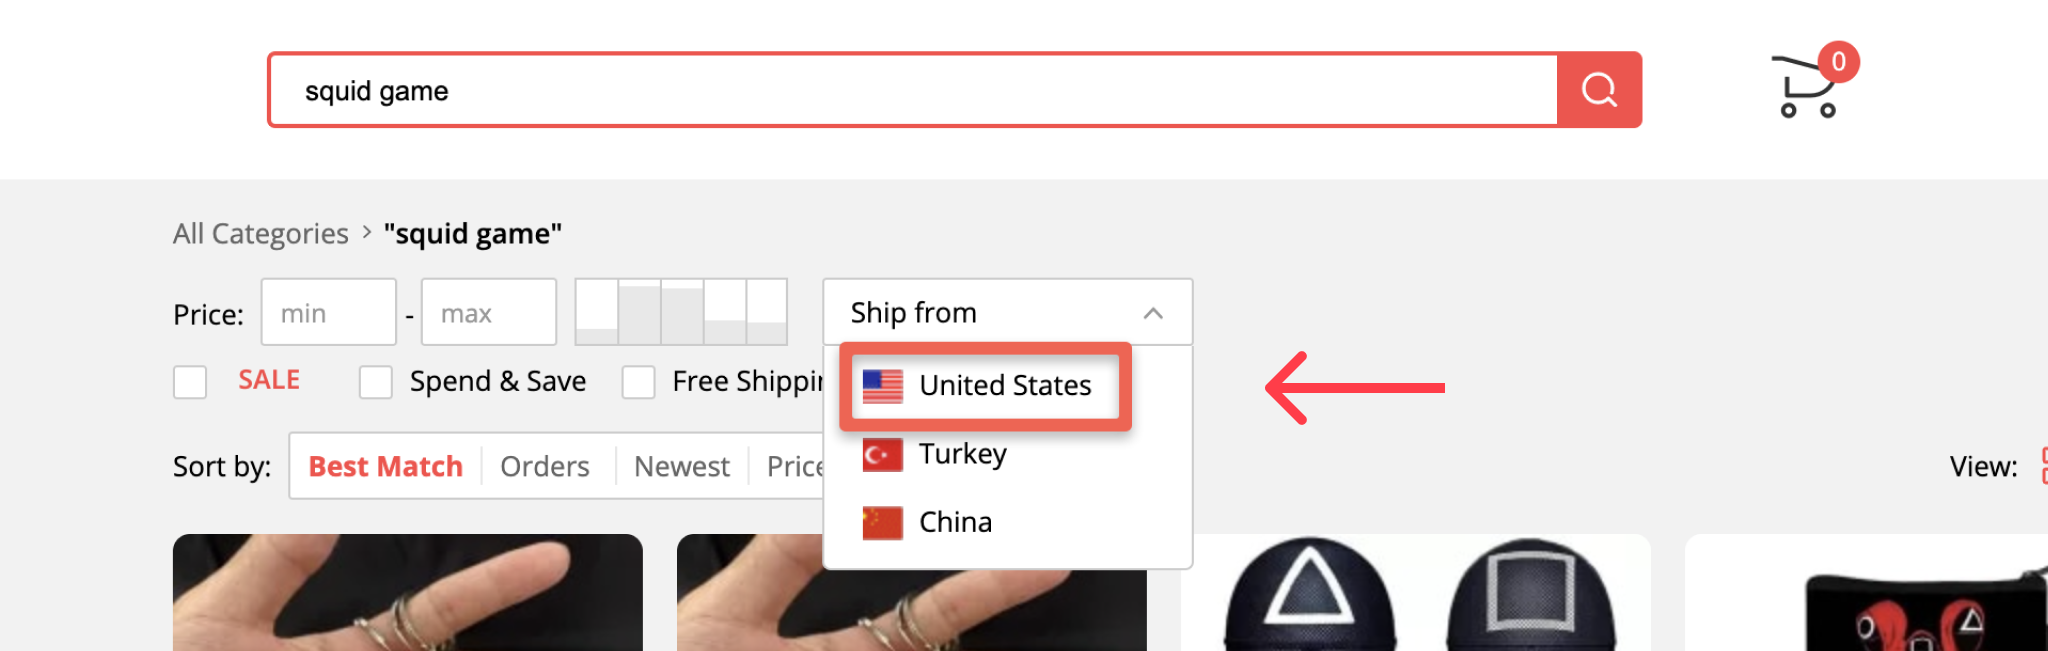 https://www.zikanalytics.com/blog/wp-content/uploads/2023/02/shipping_policy_selecting_shipping_location.png